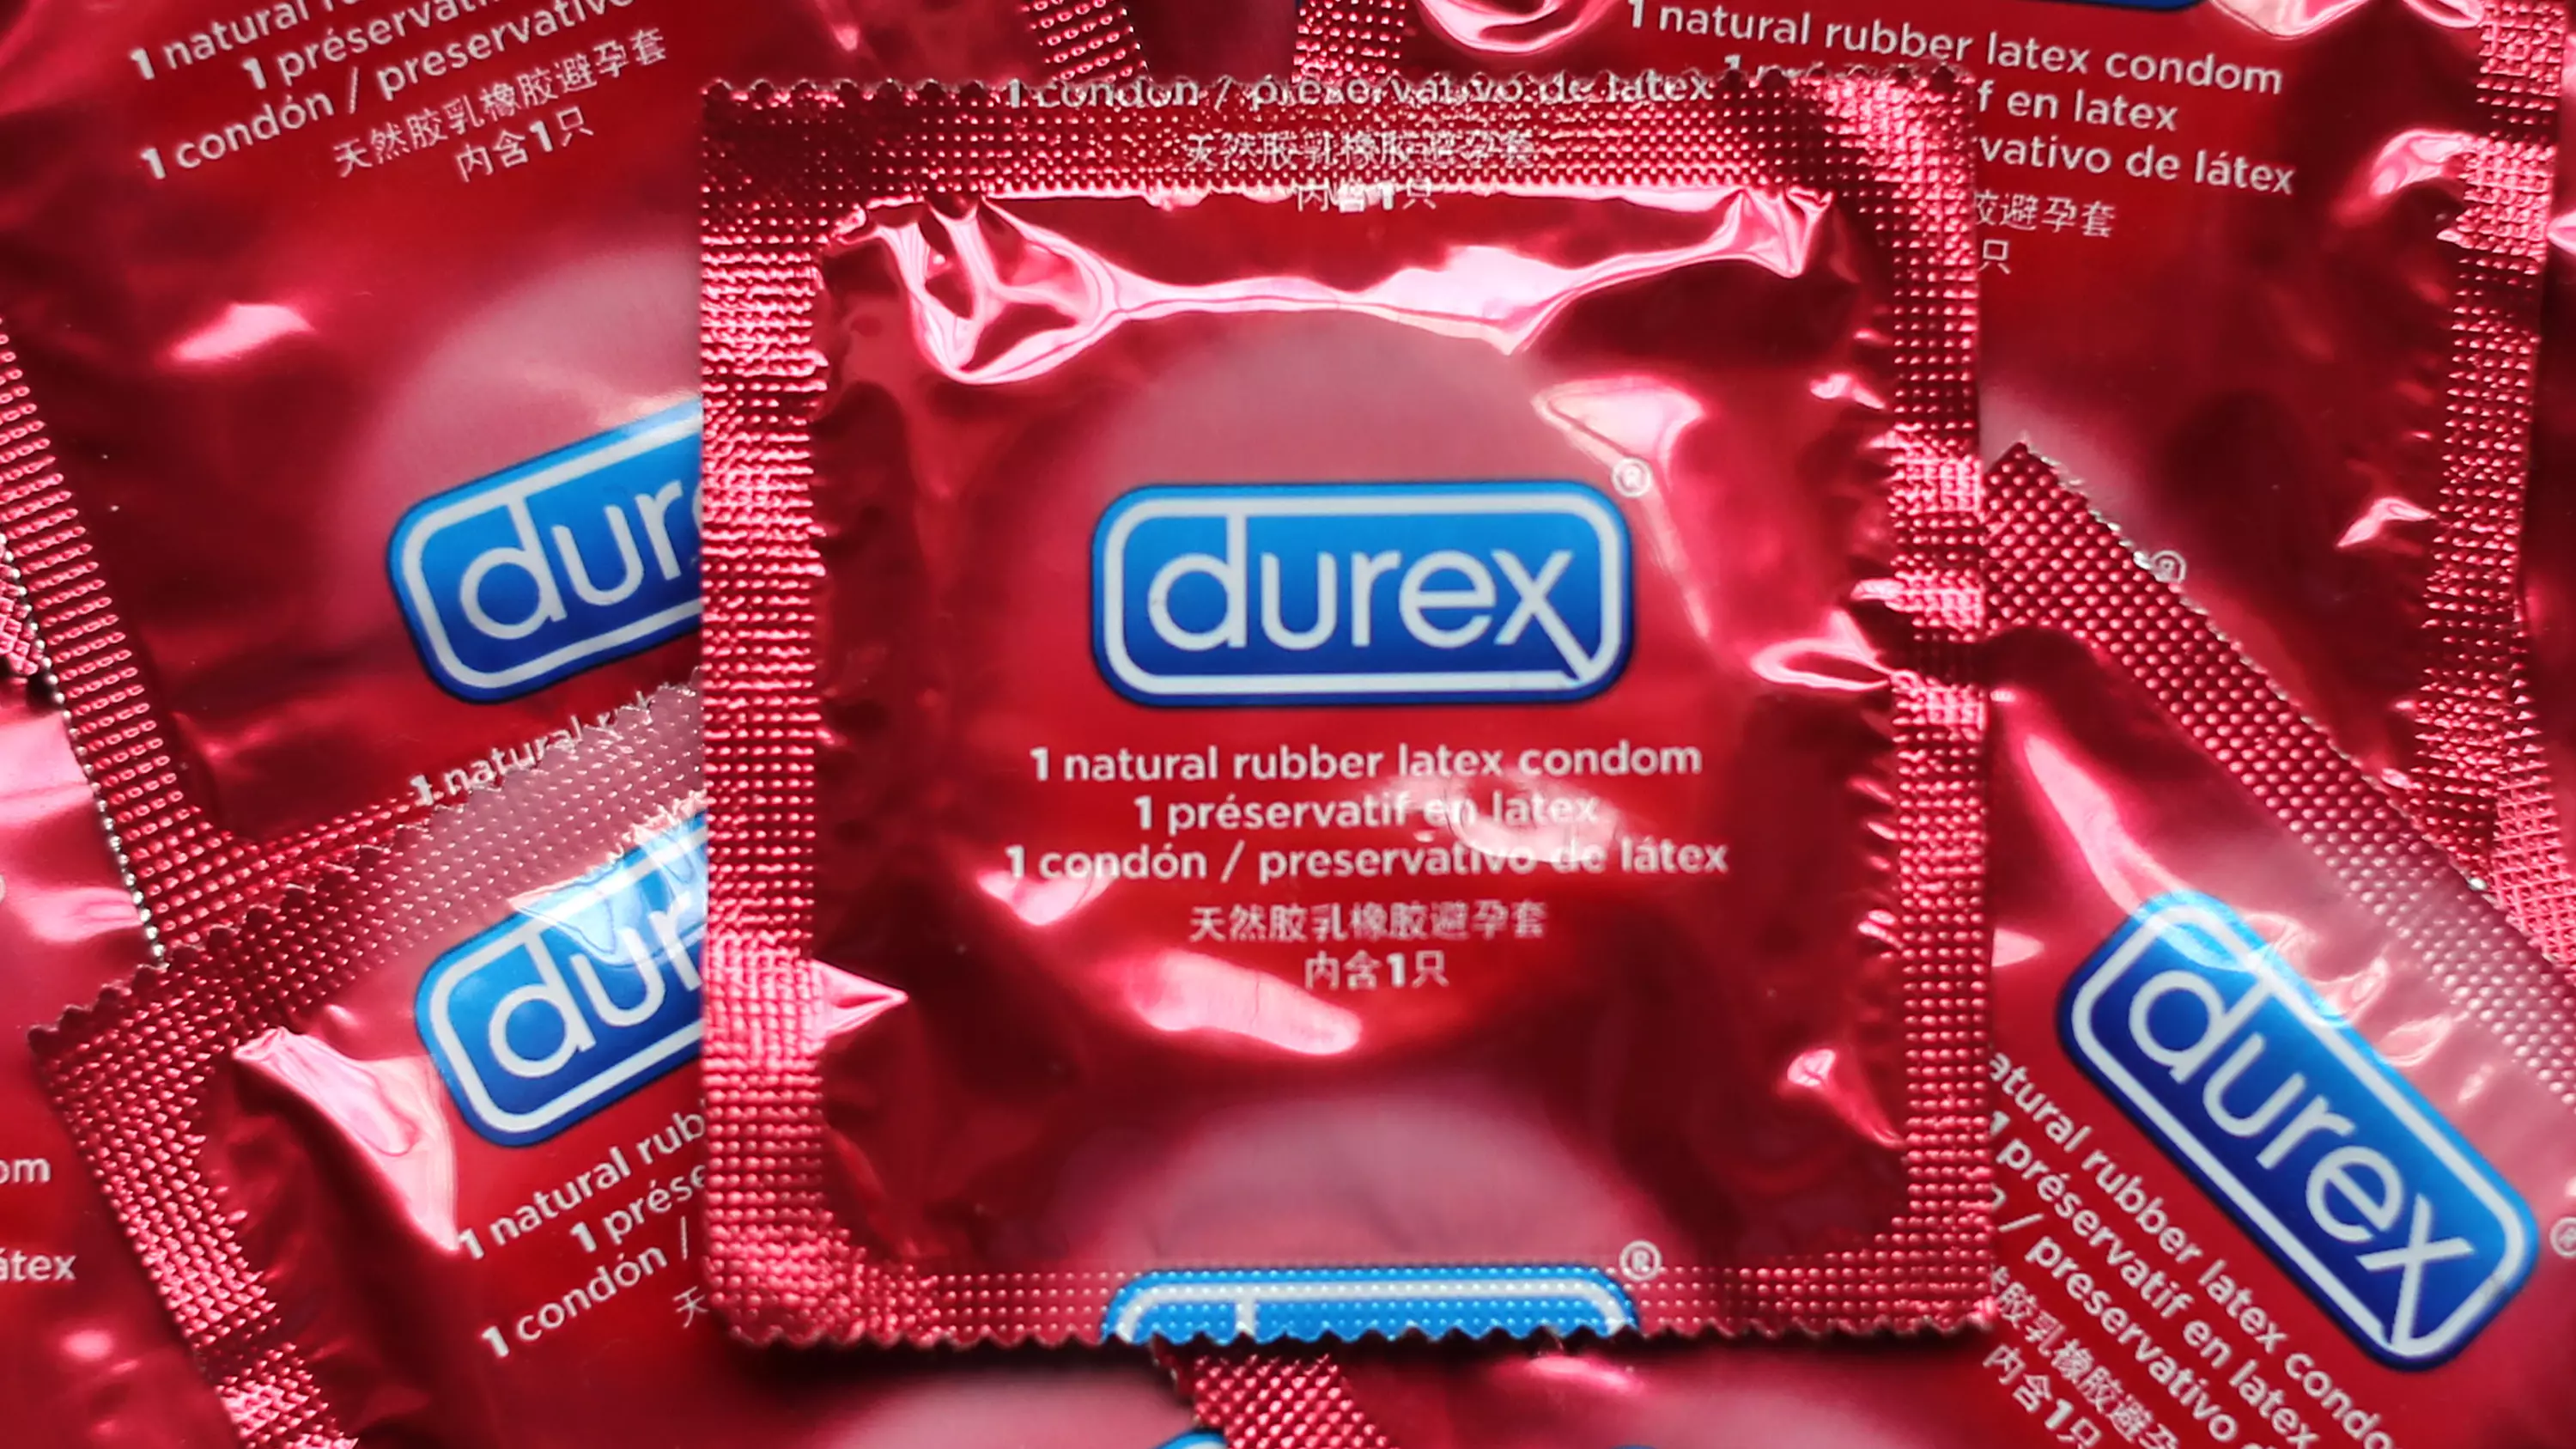 Condom Sales Up As Countries Ease Lockdowns